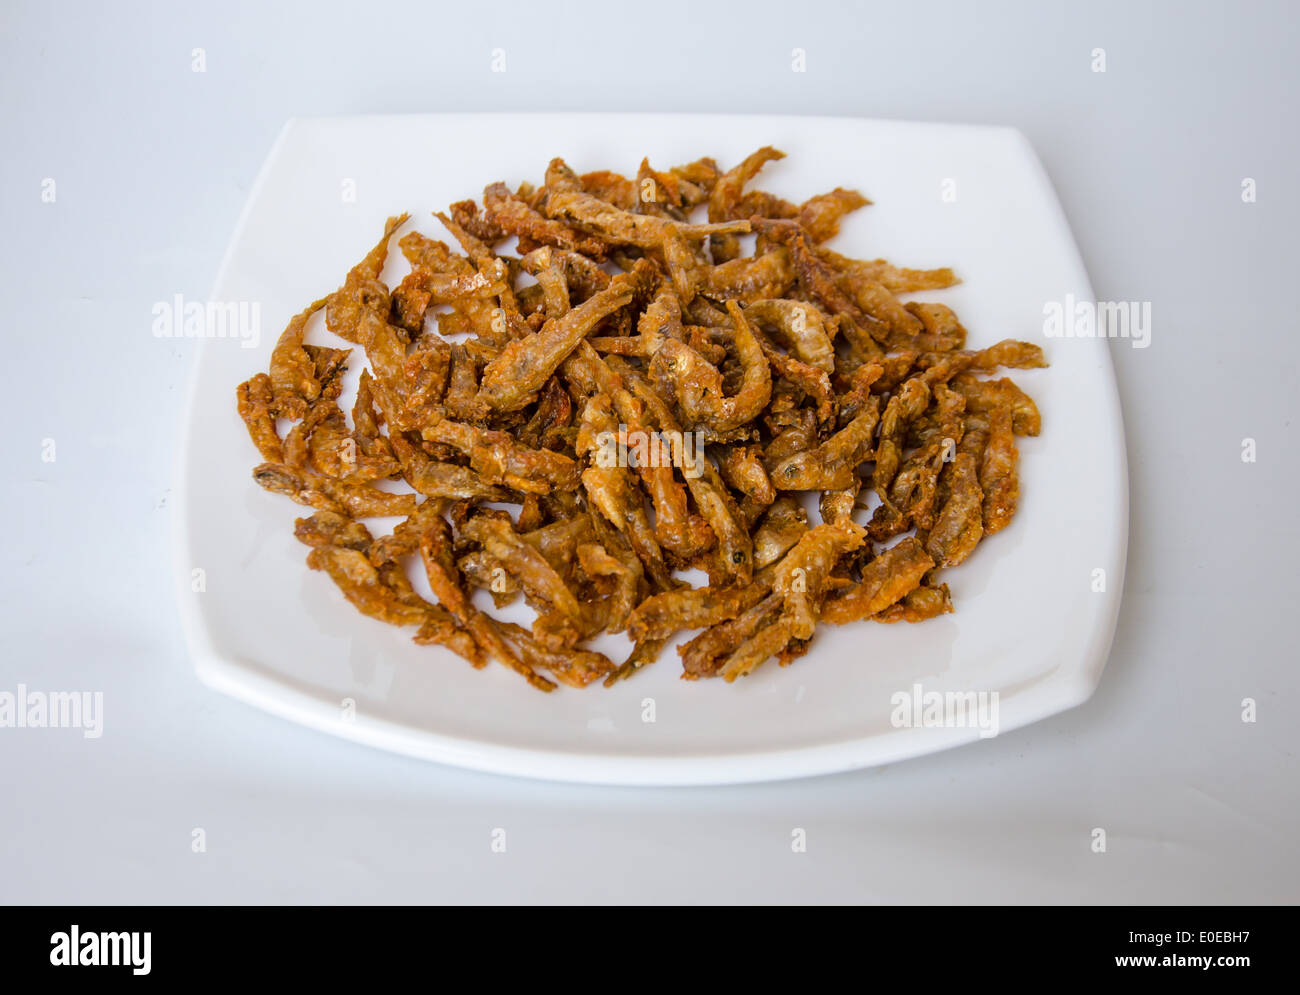 fried small fish for healthy food Stock Photo